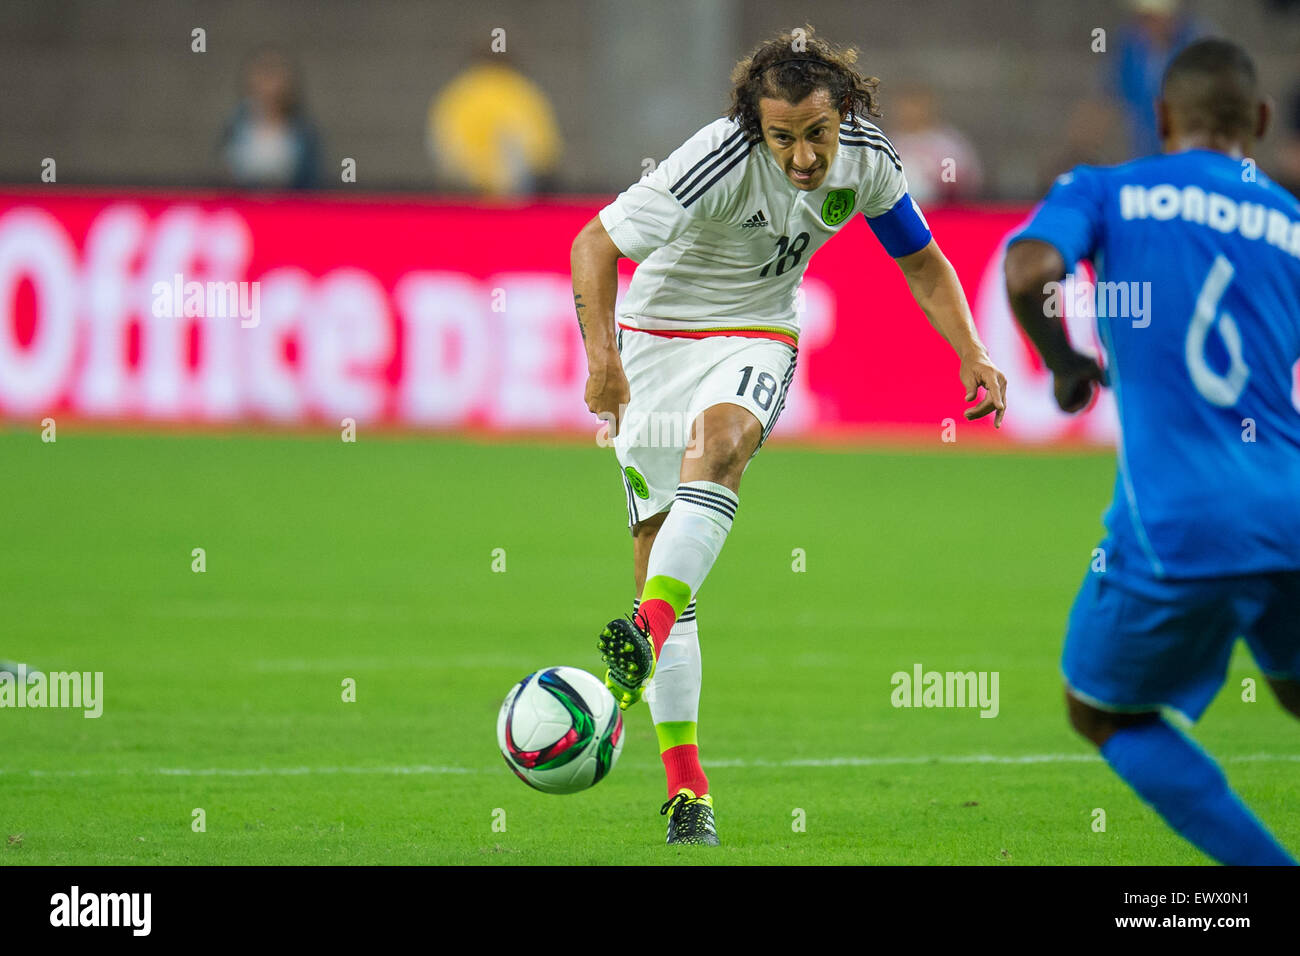 July 1, 2015: Mexico midfielder Andres Guardado (18) passes the ball during the 2nd half of an international soccer match between Honduras and Mexico at NRG Stadium in Houston, TX. The game ended in a 0-0 draw.Trask Smith/CSM Stock Photo